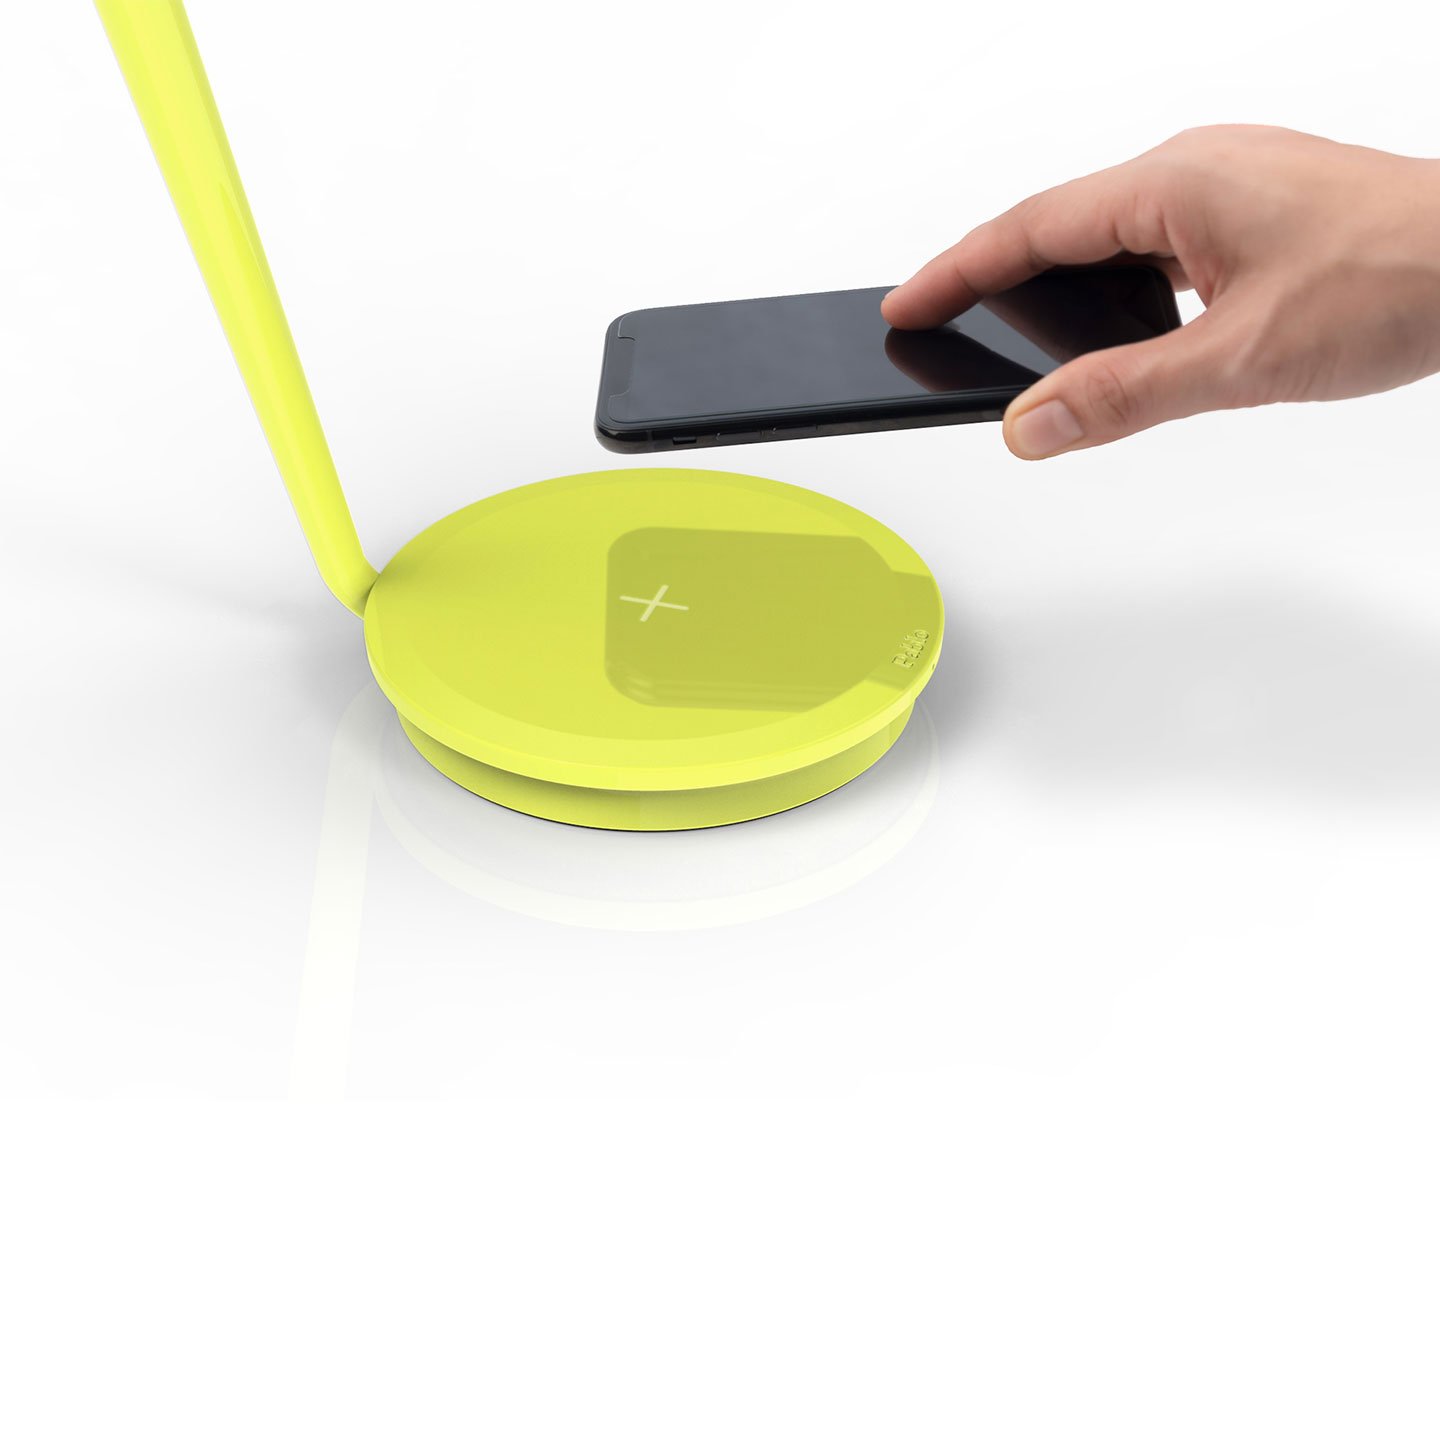 Haworth Pixo Plus Lighting in lime green color with phone being placed on charger pad